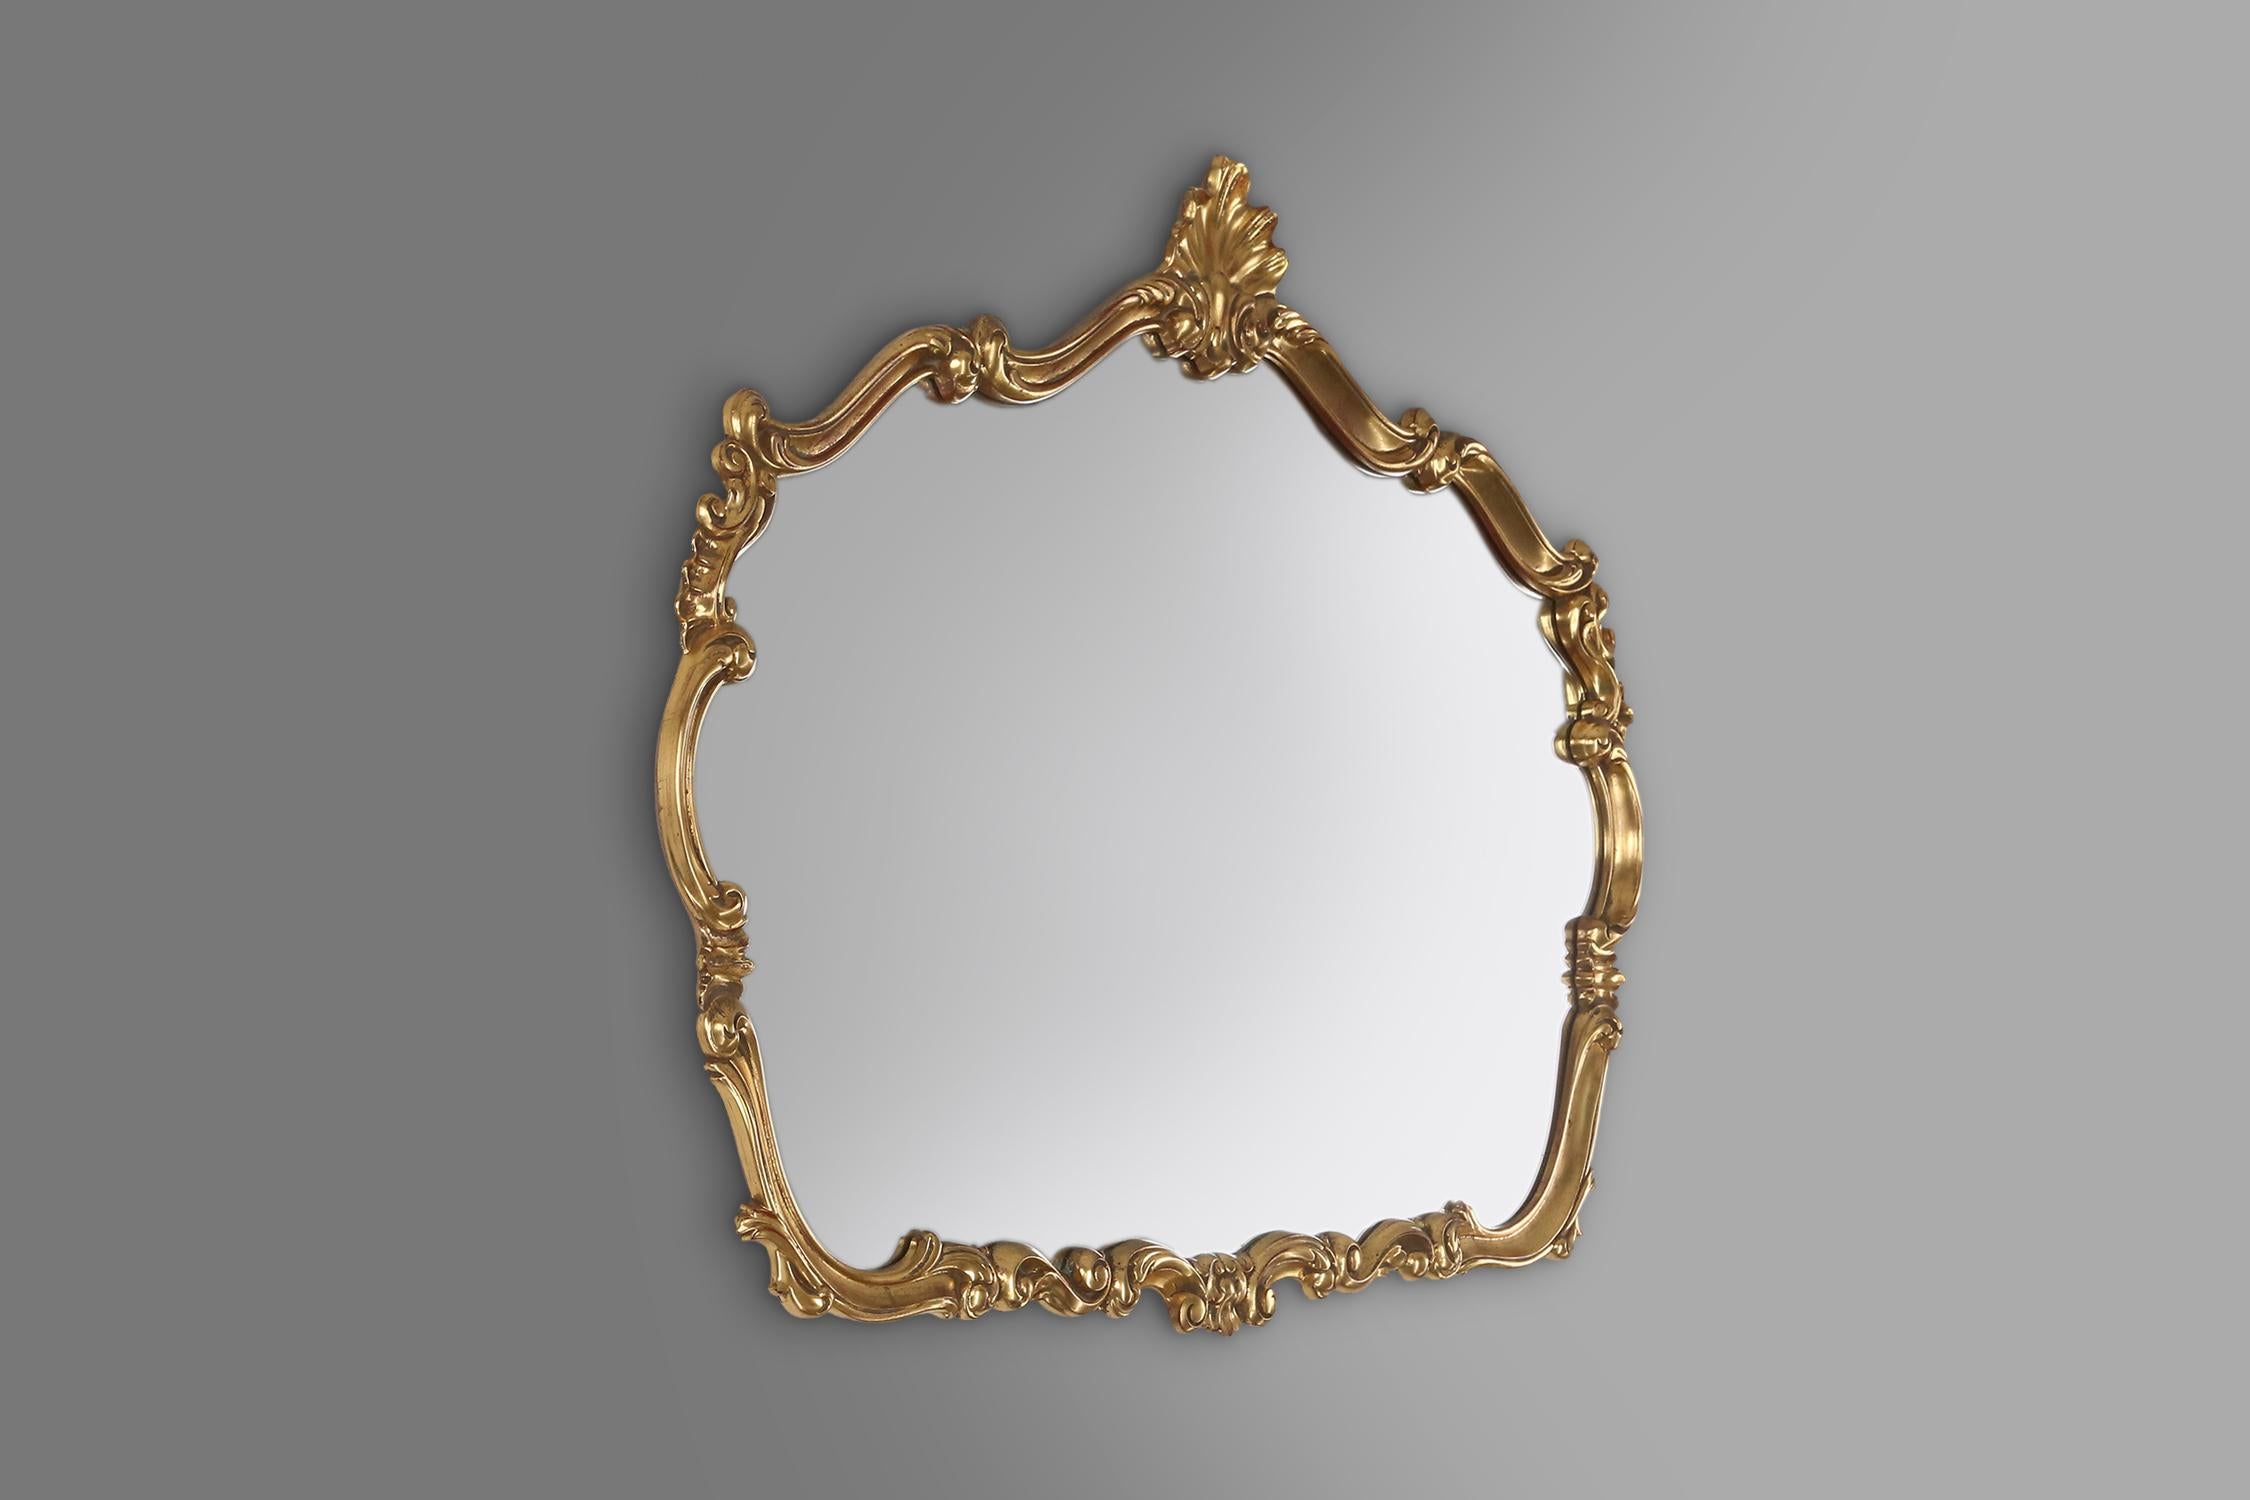 Belgium / 1970 / mirror / Deknudt / resin / romantic / antique

A large and luxuriously decorated mirror by Deknudt, made in Belgium around 1970. The mirrors frame was made in resin with gilded romantic ornaments.This stunning gold mirror with